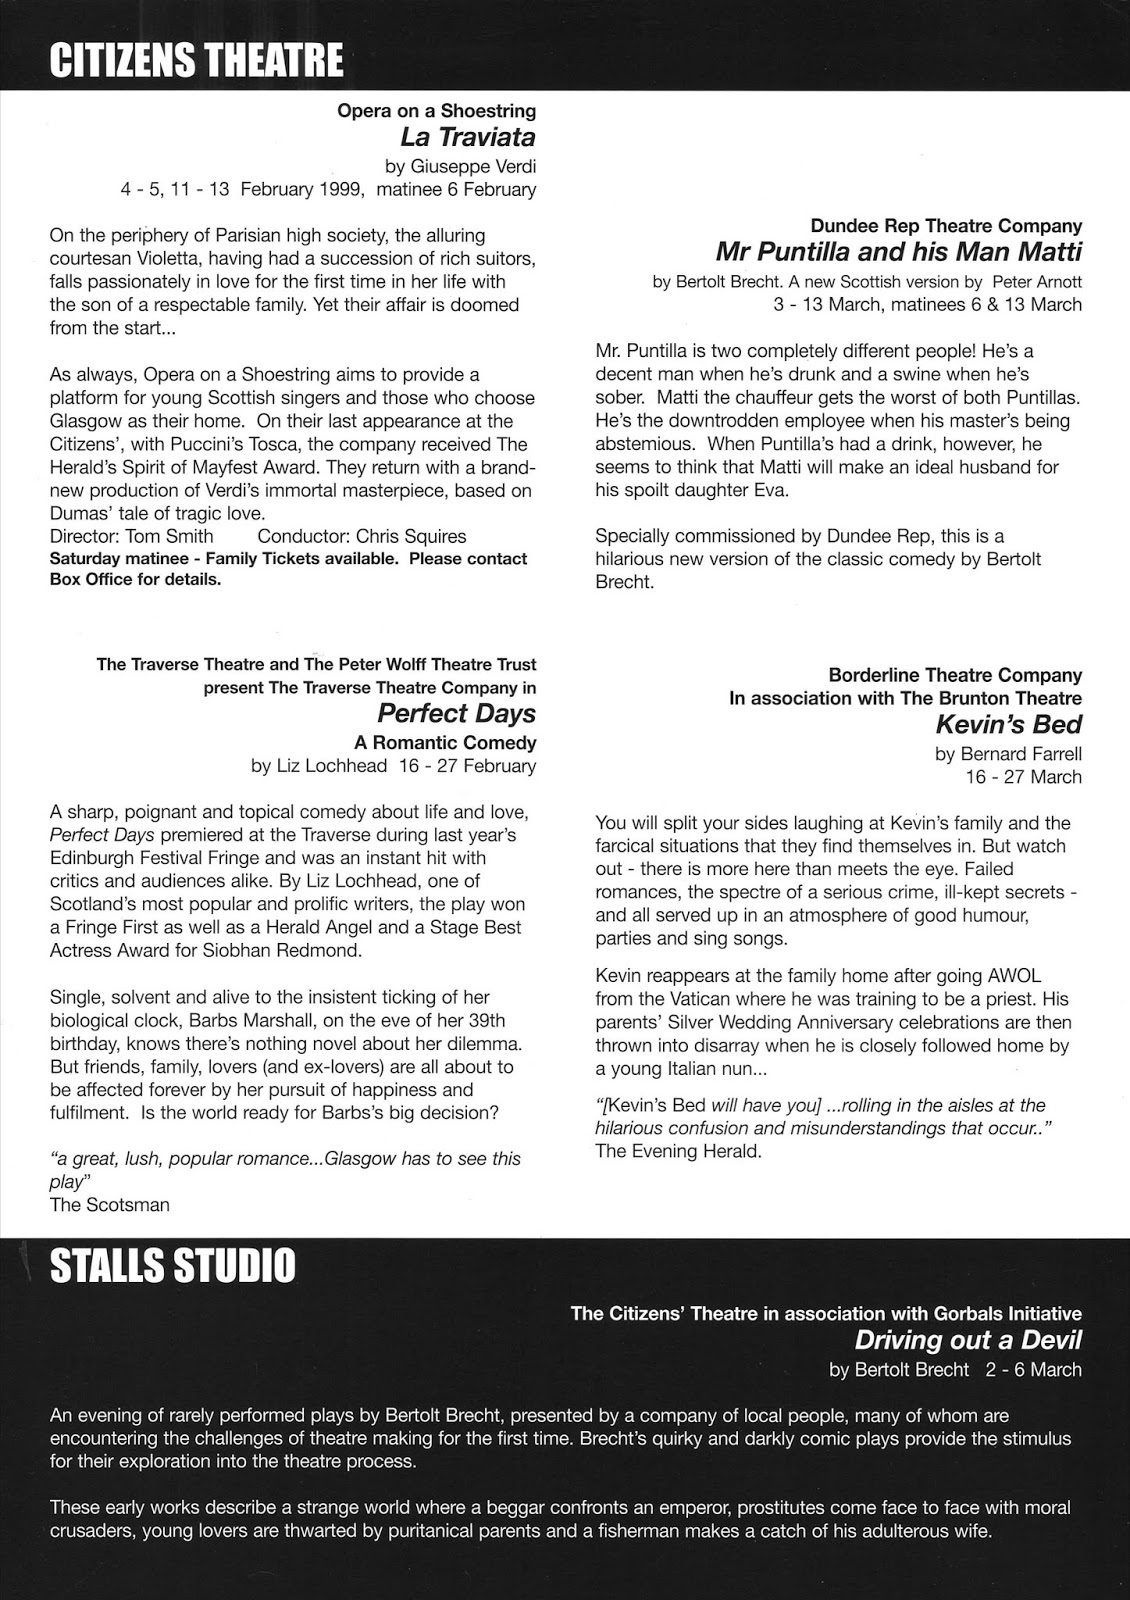 A season listing from 1999 featuring several plays at the Citz, including Driving Out the Devil.